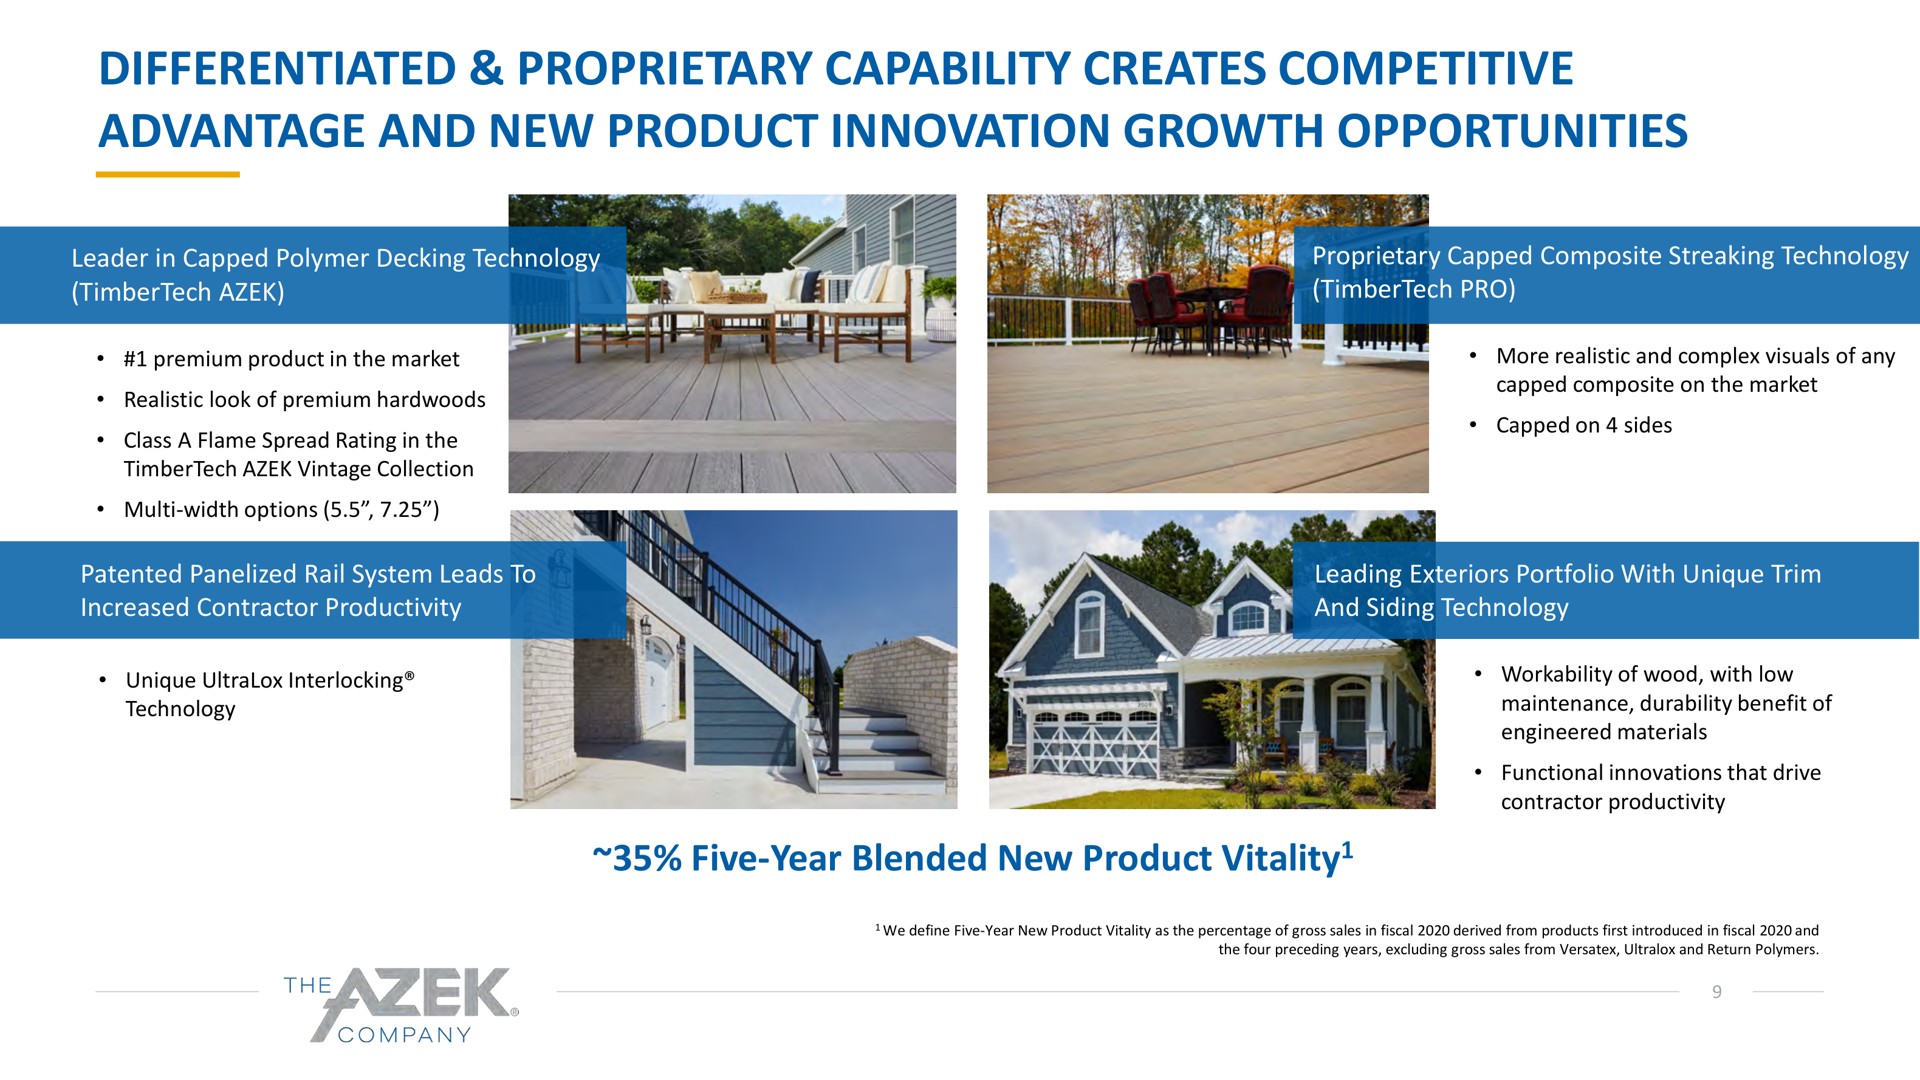 differentiated proprietary capability creates competitive advantage and new product innovation growth opportunities five year blended new product vitality vitality | Azek